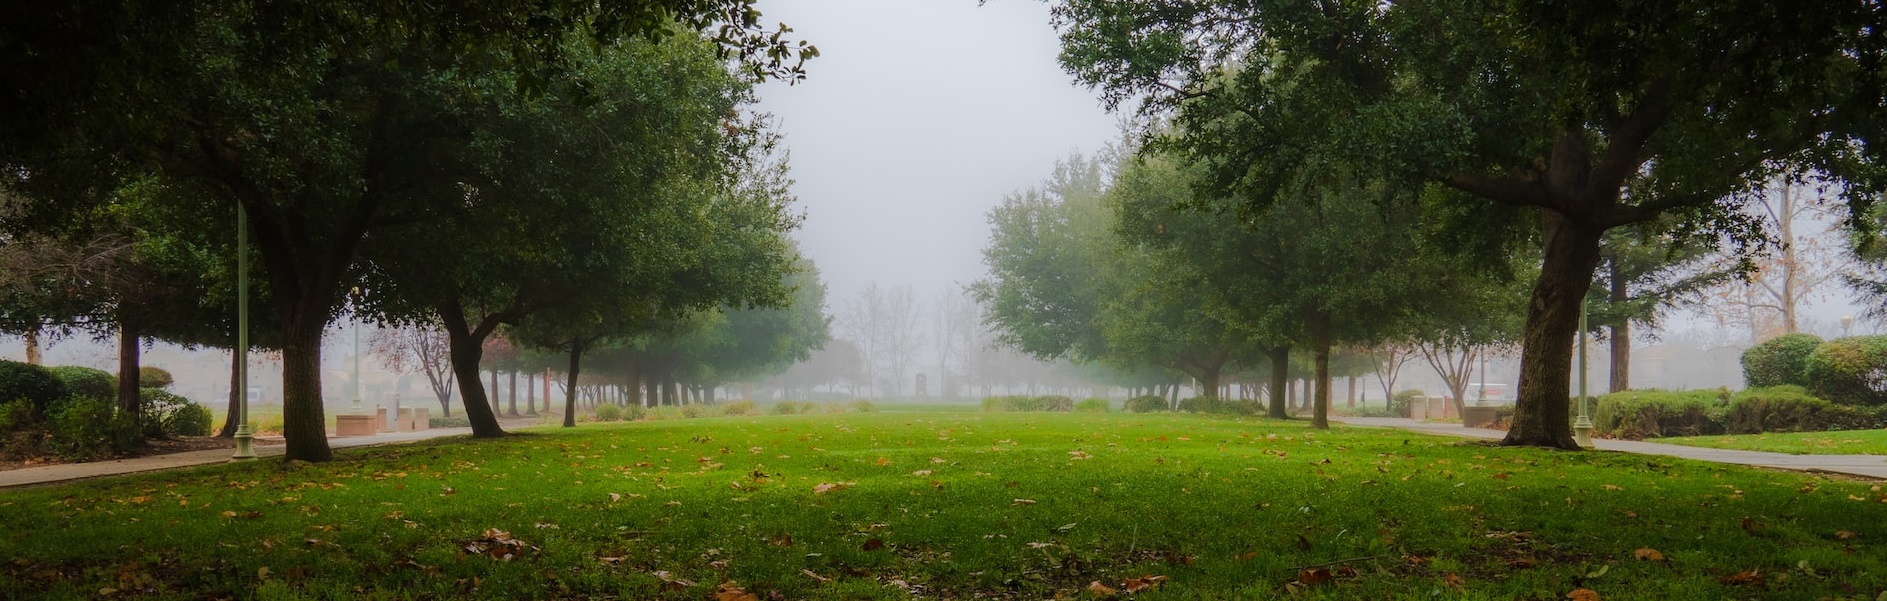 Foggy park in Elk Grove | Breast Cancer Car Donations